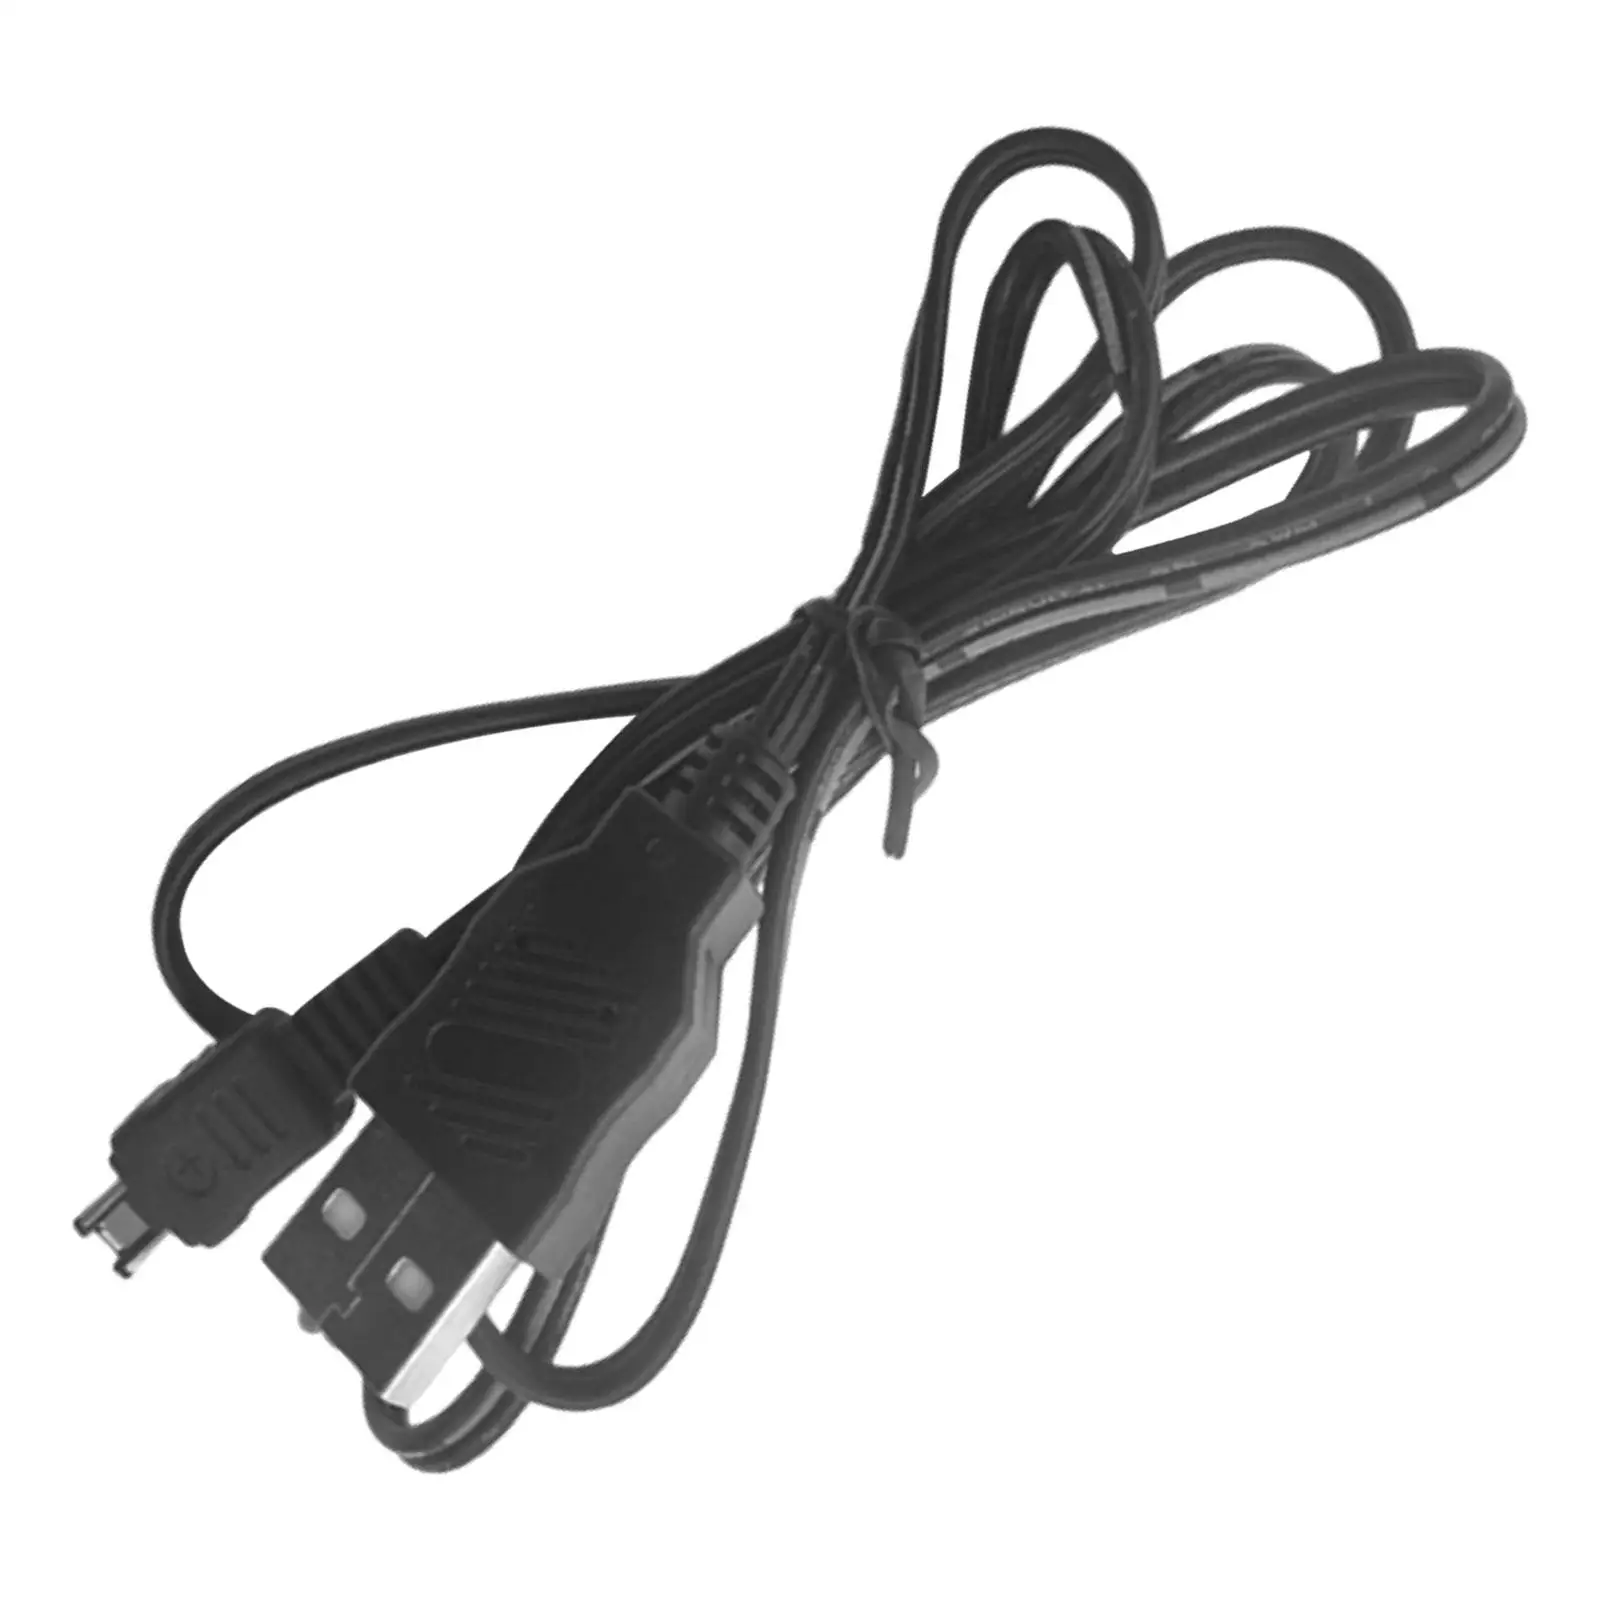 USB Charging Cable CA-110E Accessory Portable 1.2M Long USB Cord Replace Power Adapter Cable for Canon Camera